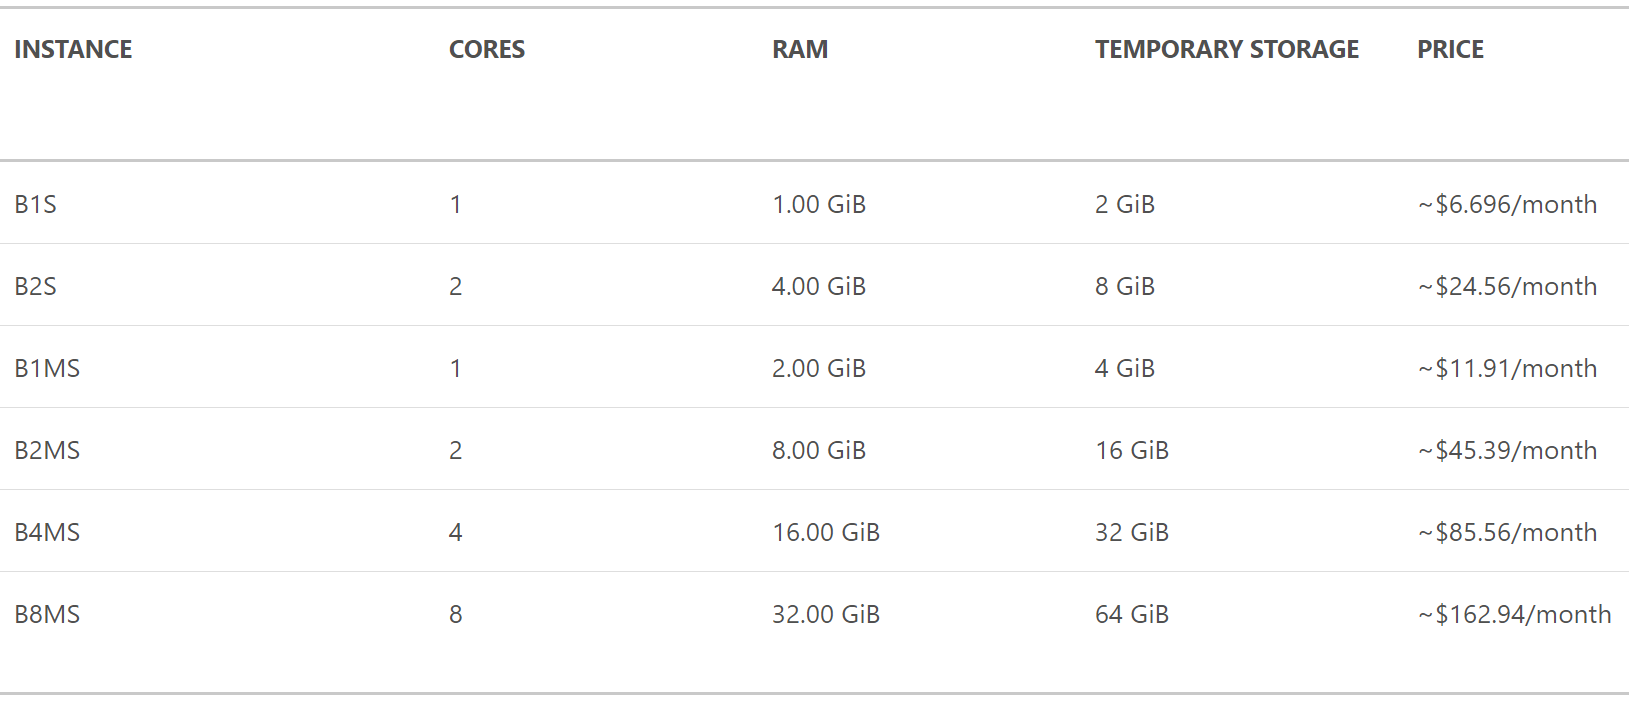 The RRP pricing of the Azure B-Series virtual machines in West US 2 [Image Credit: Microsoft]